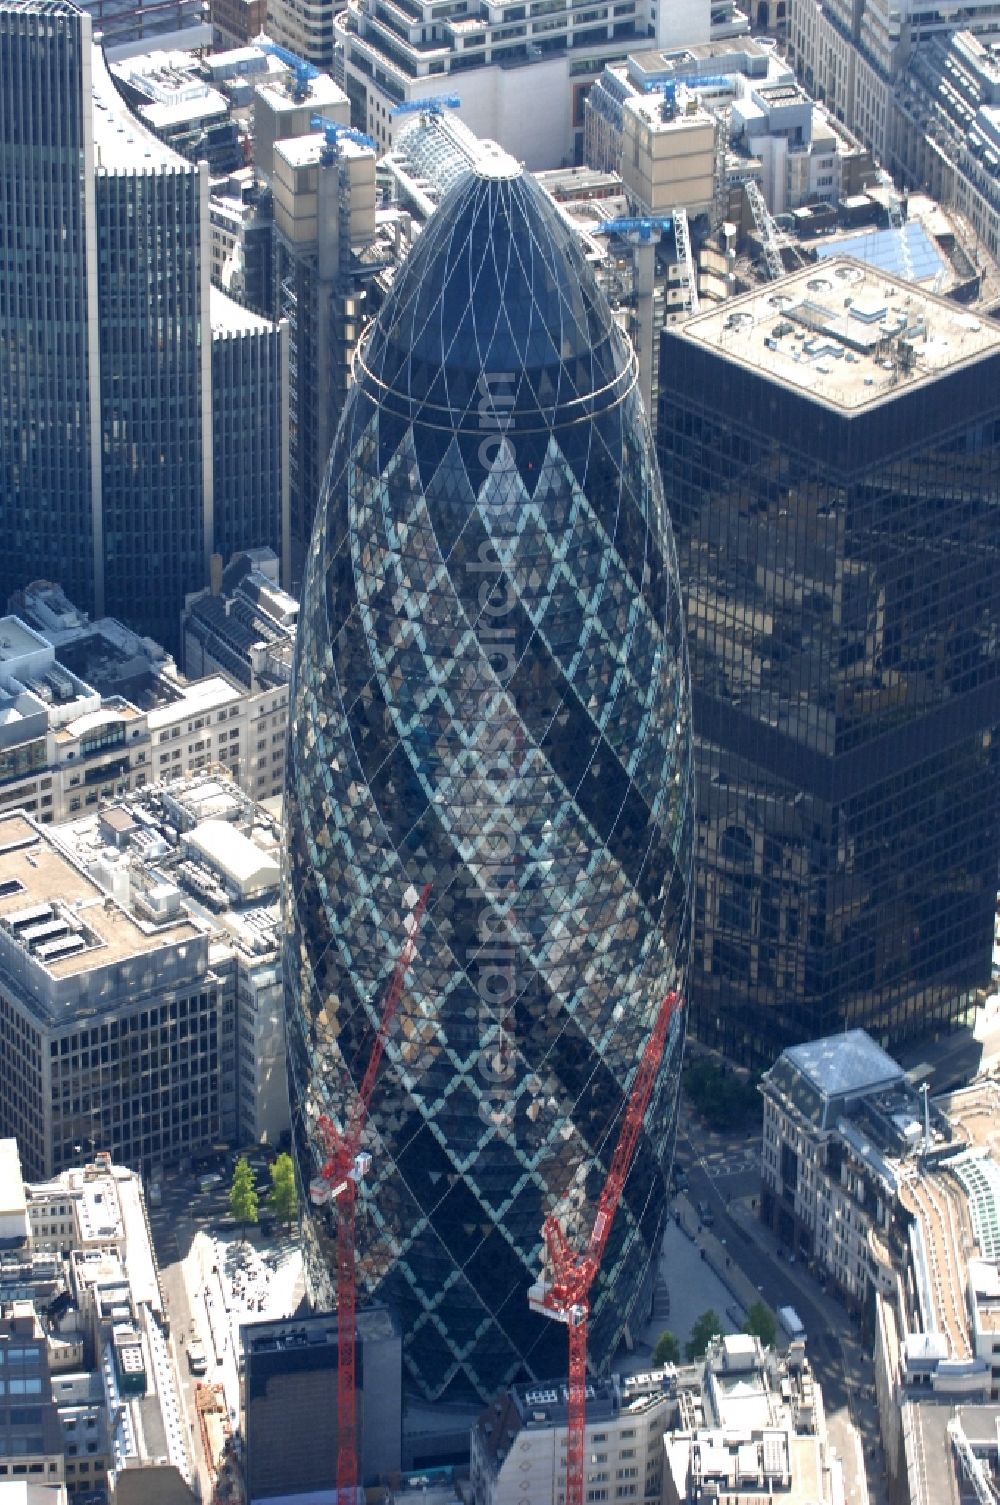 Aerial photograph London - High-rise St Mary Axe, The Gherkin often (English for pickle) or Swiss Re Tower called a skyscraper in the City of London financial district. It was established in 2001 to 2004 the architect Ken Shuttleworth and Lord Norman Foster at the site of the destroyed by an IRA attack Baltic Exchange and is an office tower of the reinsurer Swiss Re